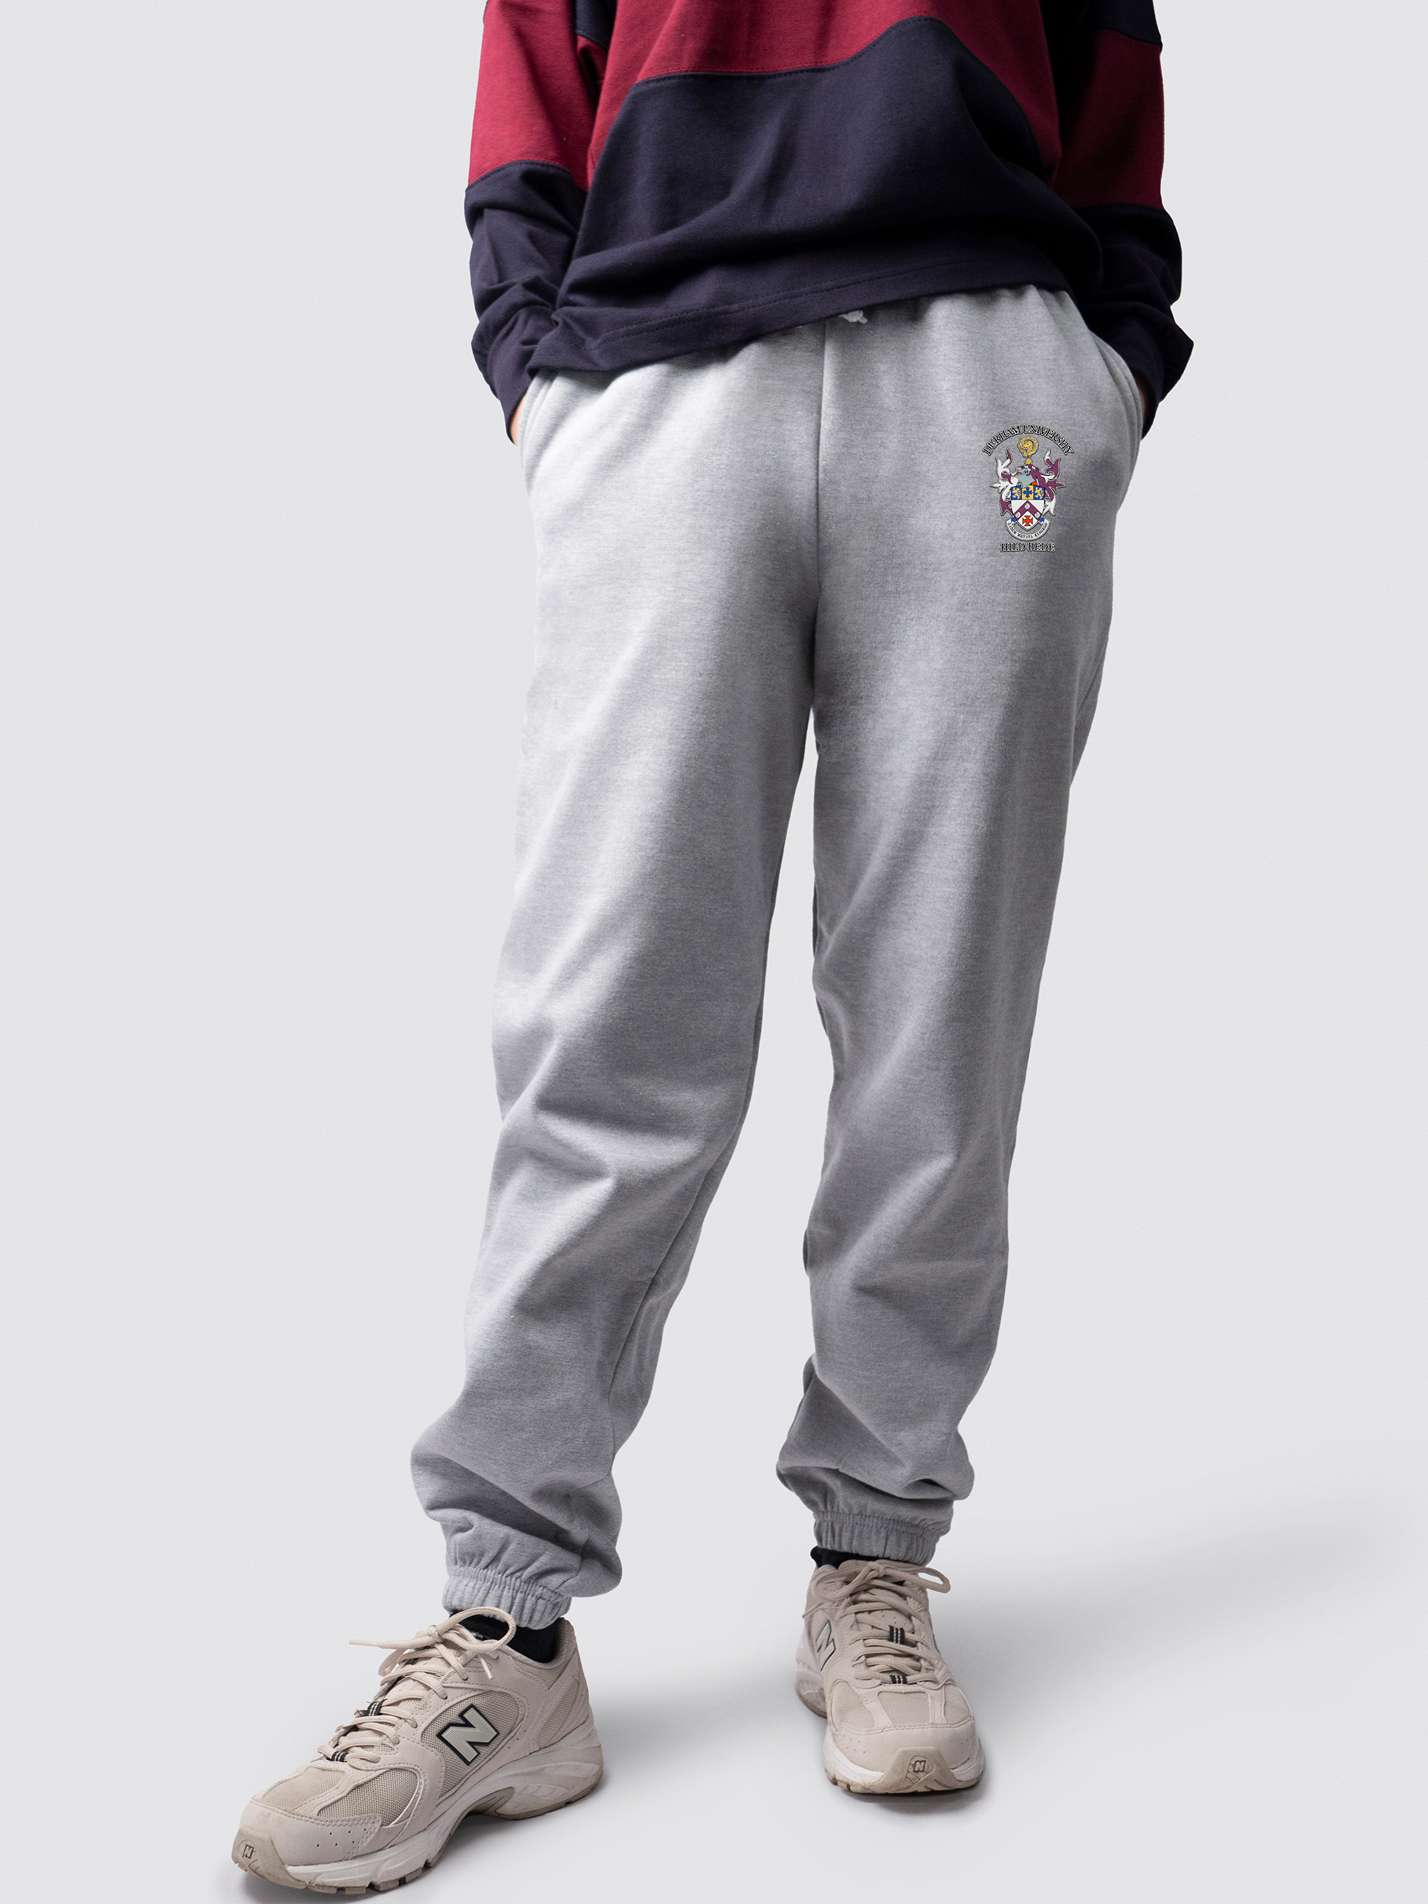 undergraduate cuffed sweatpants, made from soft cotton fabric, with St Hild and St Bede logo